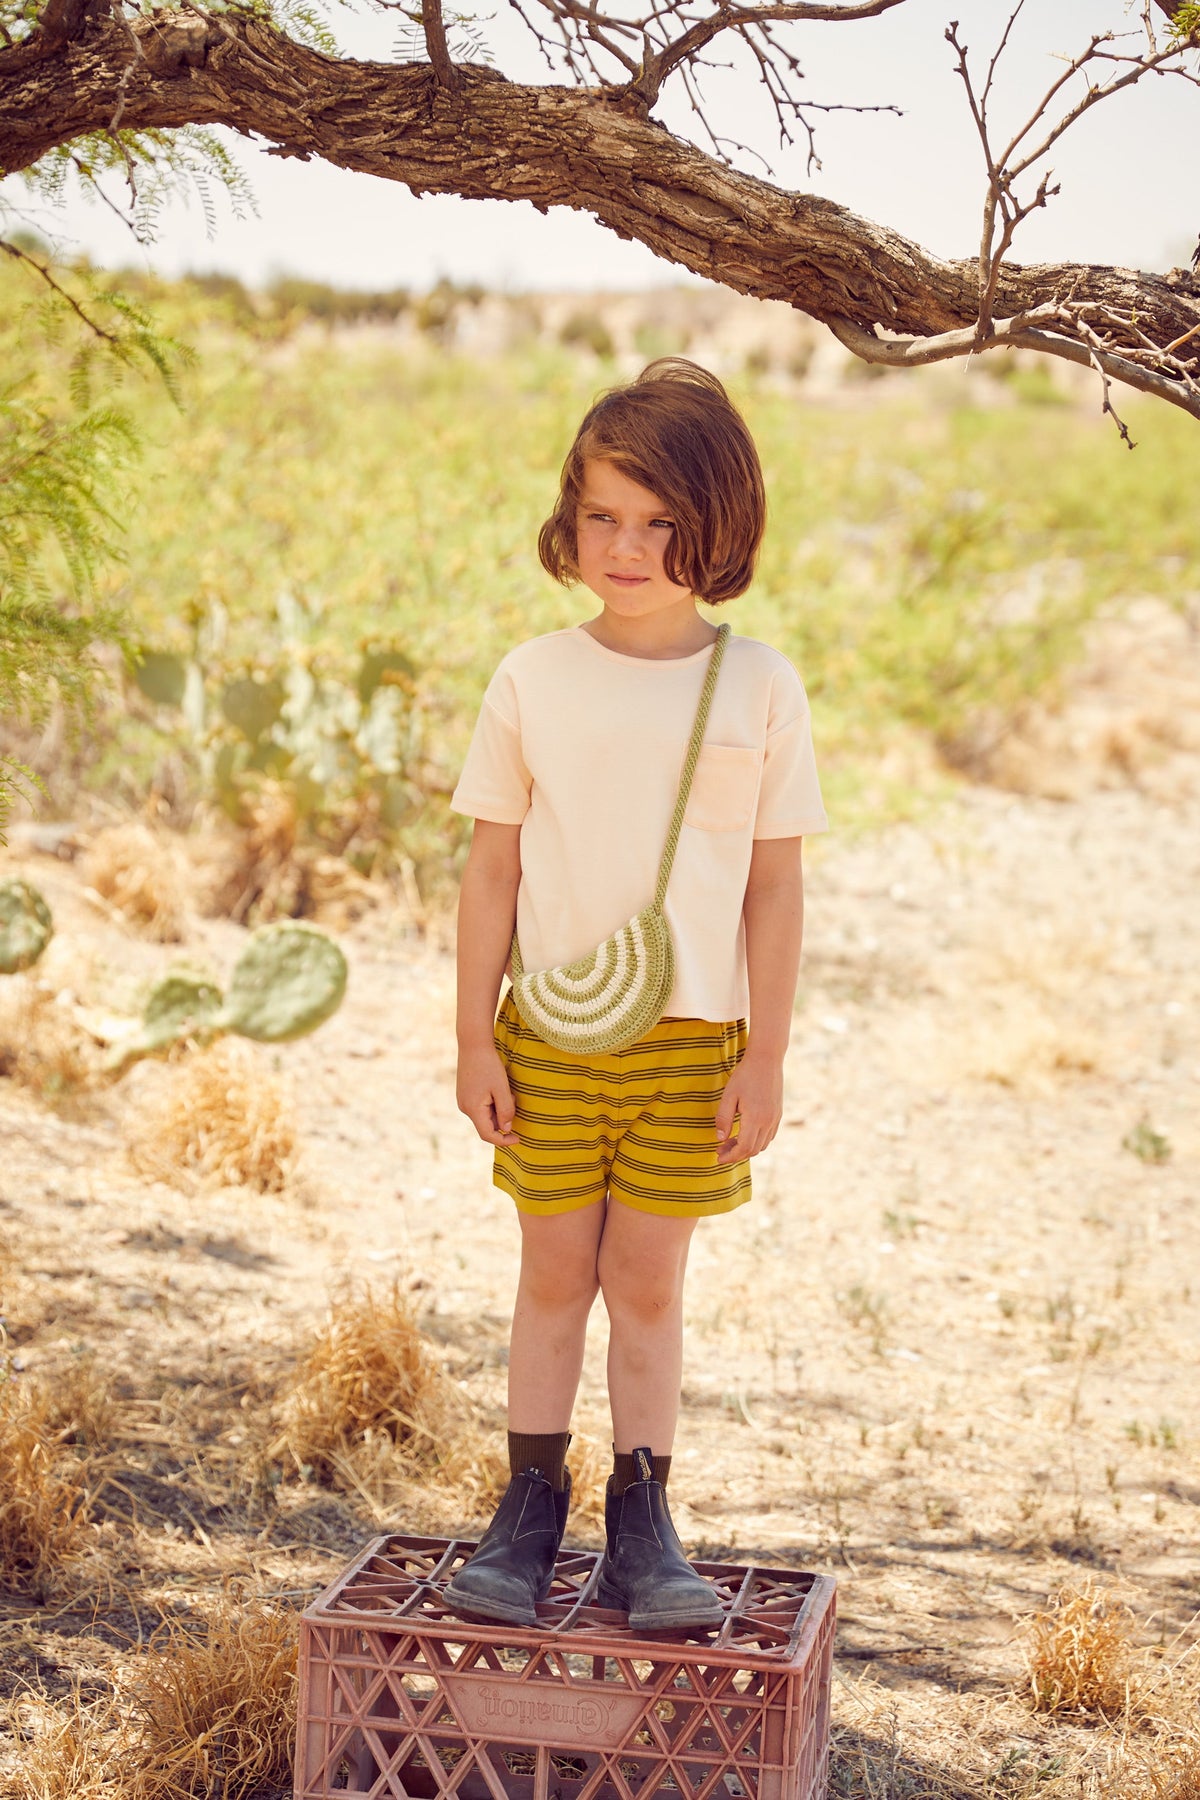 Cycling Shorts - Dandelion Stripe+Model is 45.25 inches tall, 45lbs and wearing size 4-5y